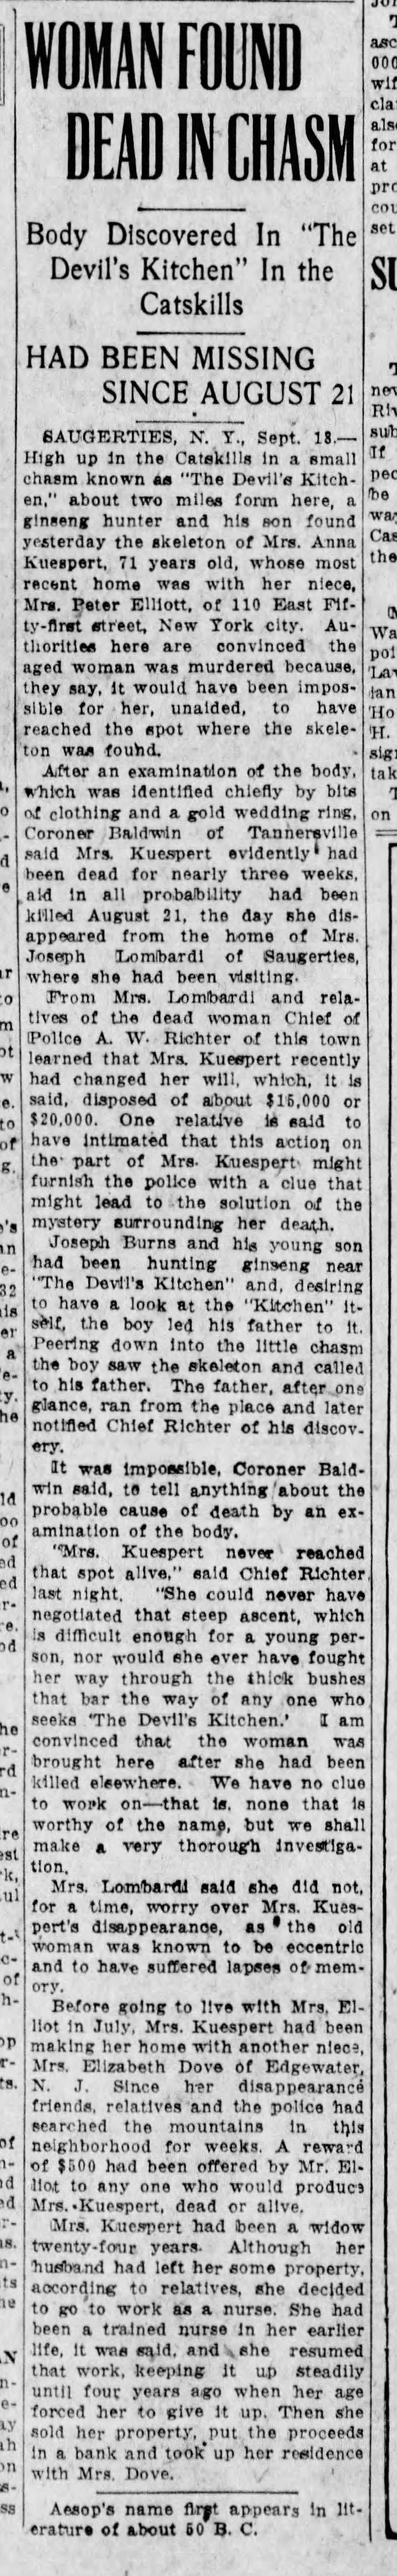 Devil's Mountain 71 year old woman found dead 9/18/1925